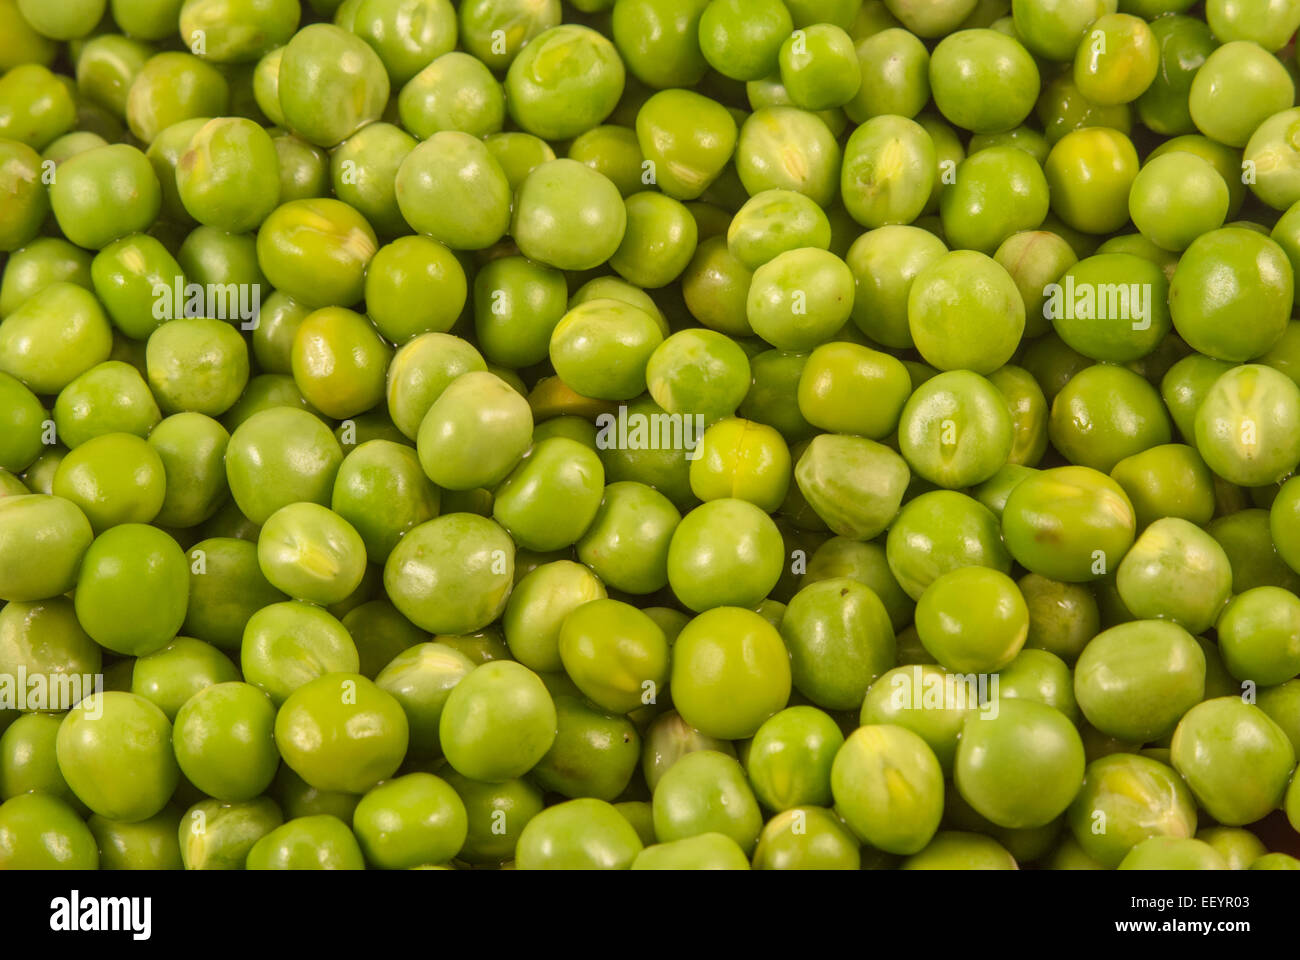 Green Peas background texture vegetable illuminated with natural light Stock Photo